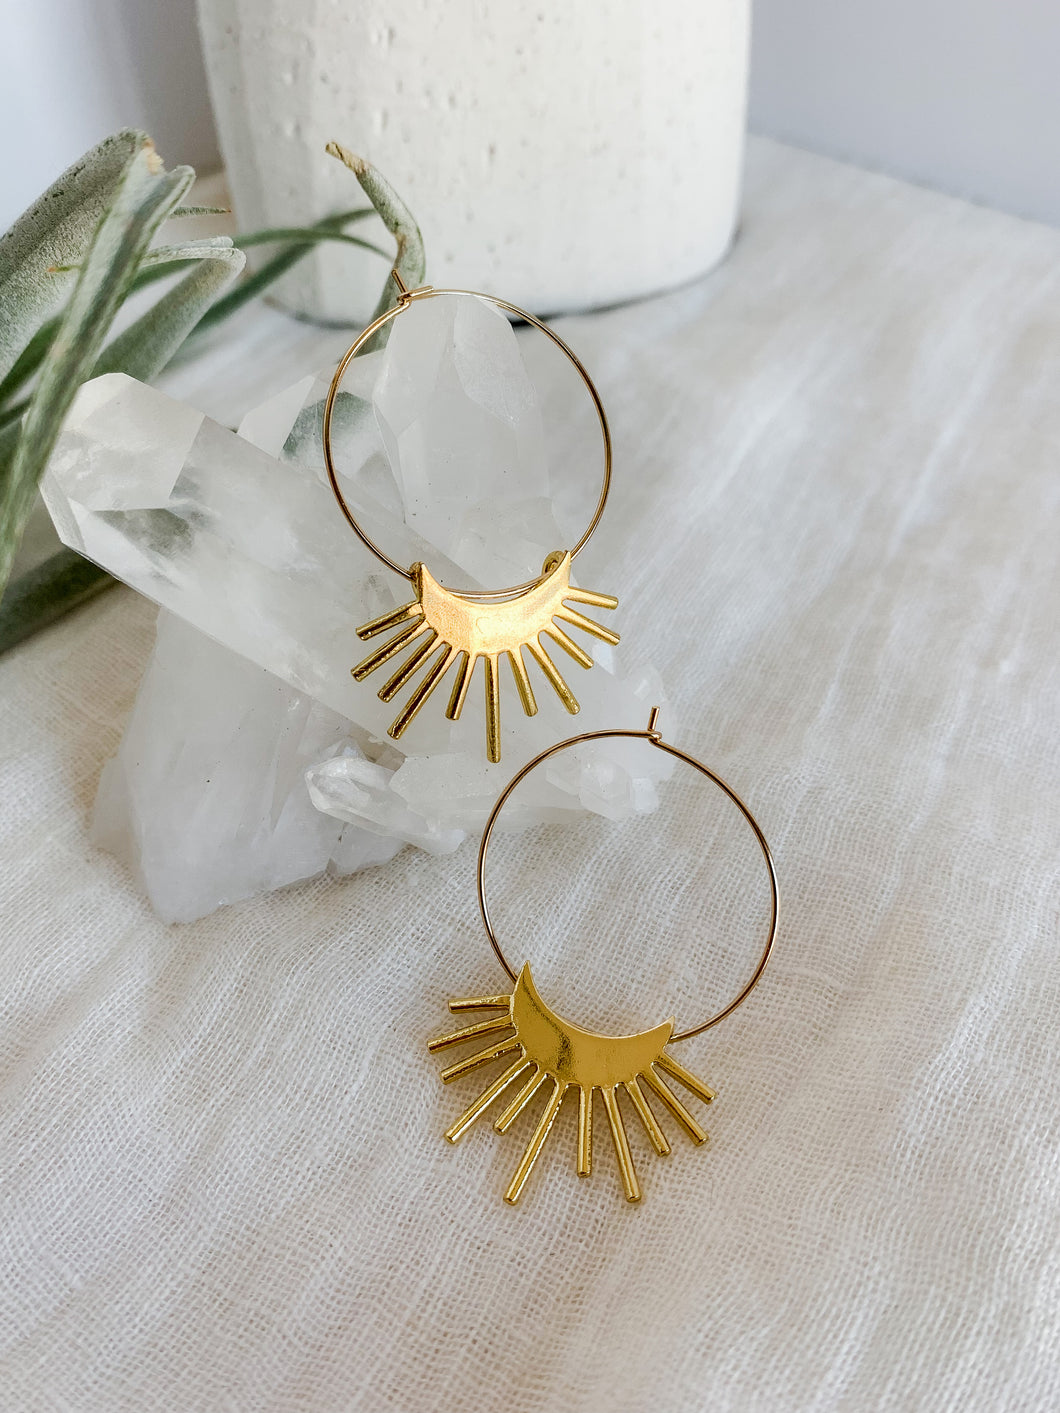 A pair of gold plated 30mm hoop earrings with a rising moon charm 